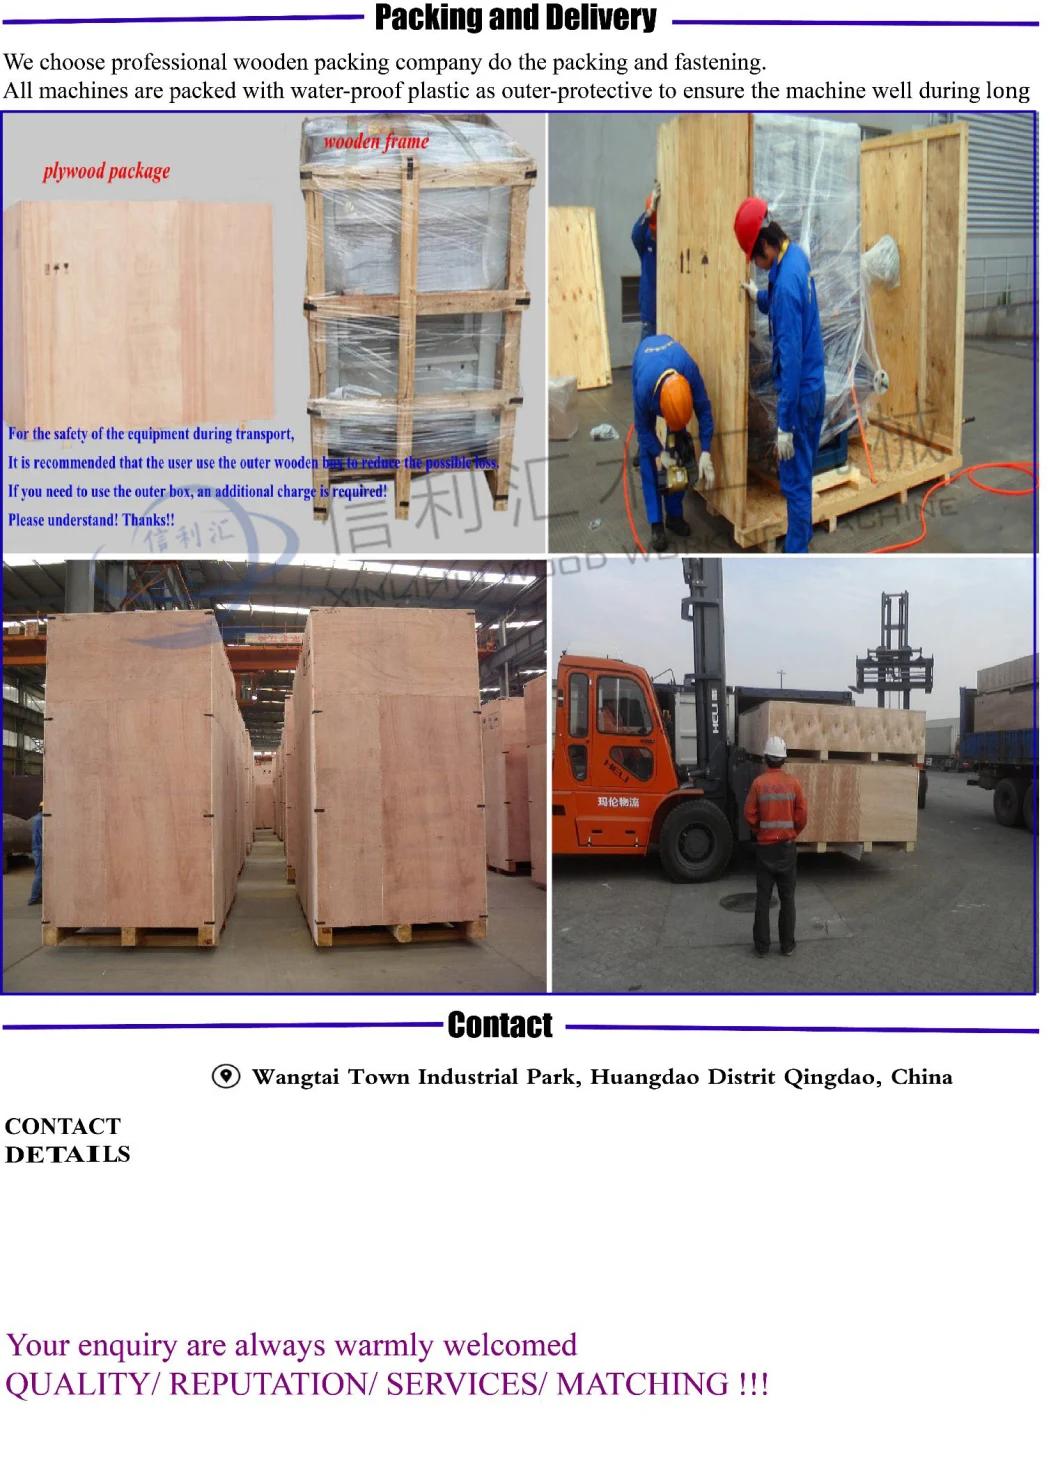 Industrial Dust Removal Equipment/ Dust Removing Equipment Scraper Type Central Dust Removal Equipment Quality Guaranteed Furniture Factory Dust Collector